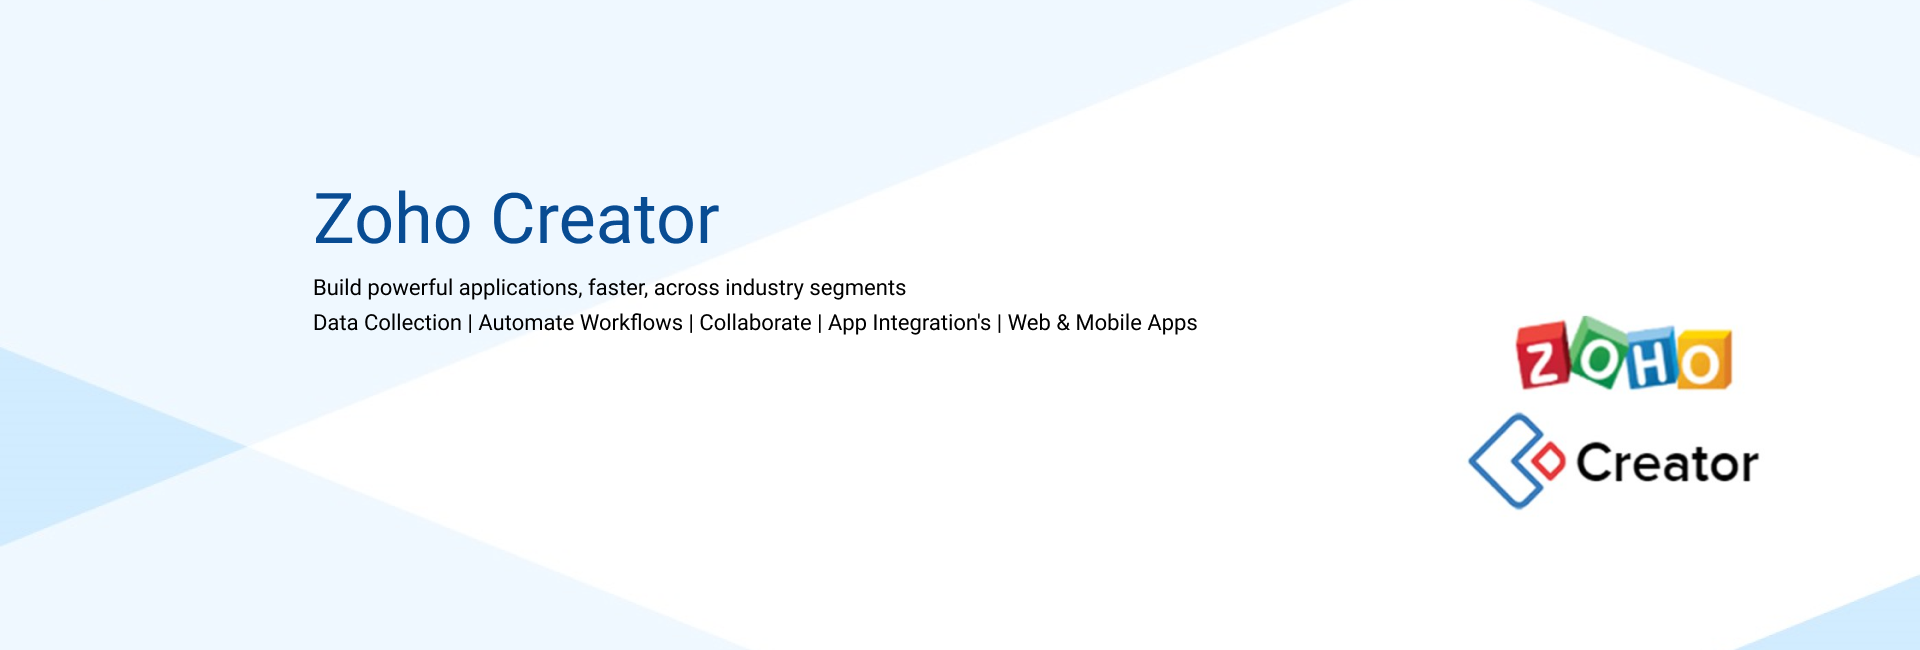 Zoho Creator build powerful applications, faster, across industry segments used for Data Collection, Automate Workflows, Collaborate, App Integrations, Web and Mobile Apps